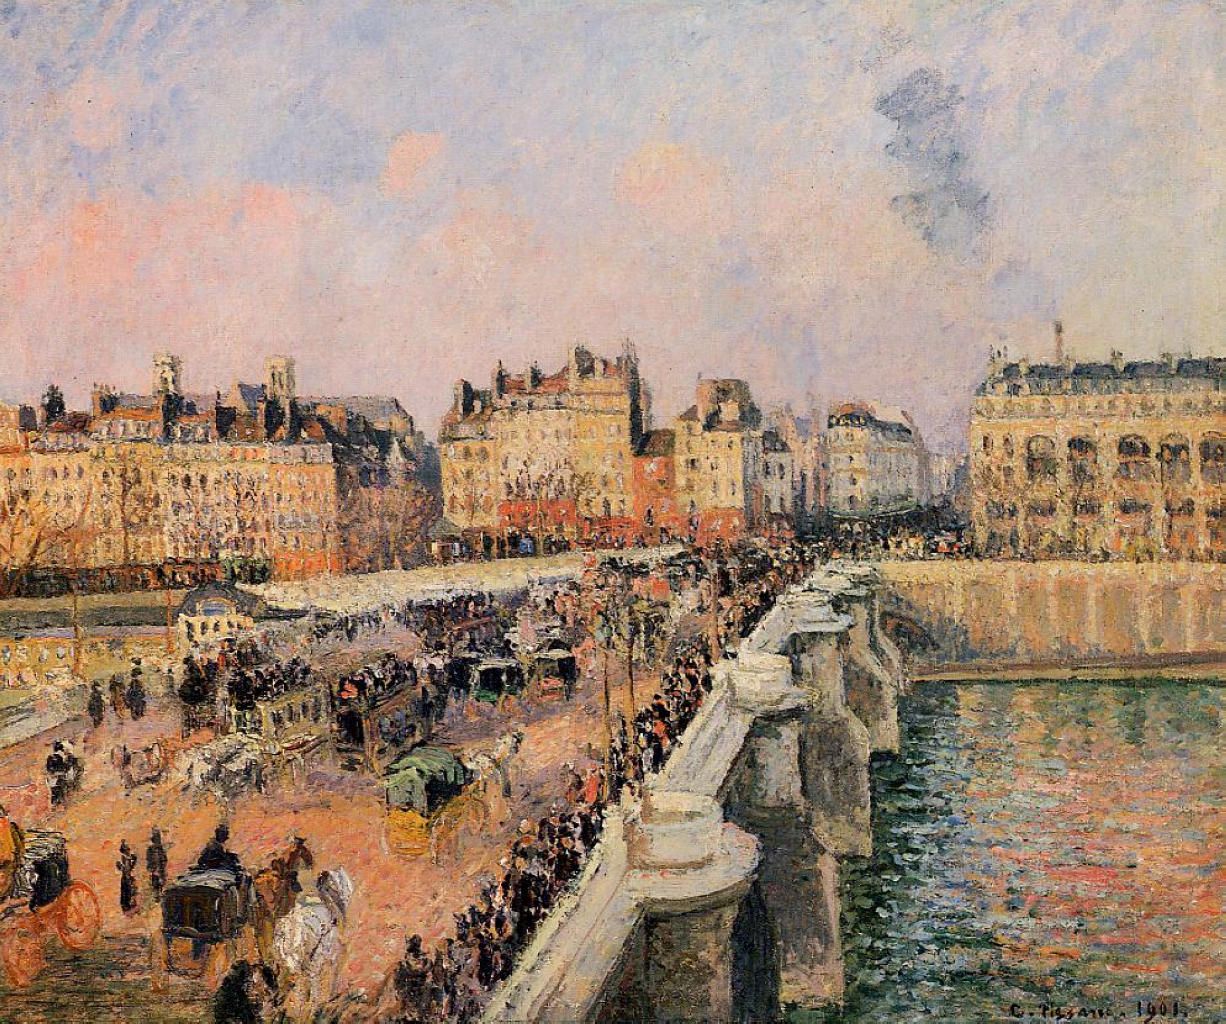 Pont Neuf, Afternoon, by Camille Pissarro, 1901